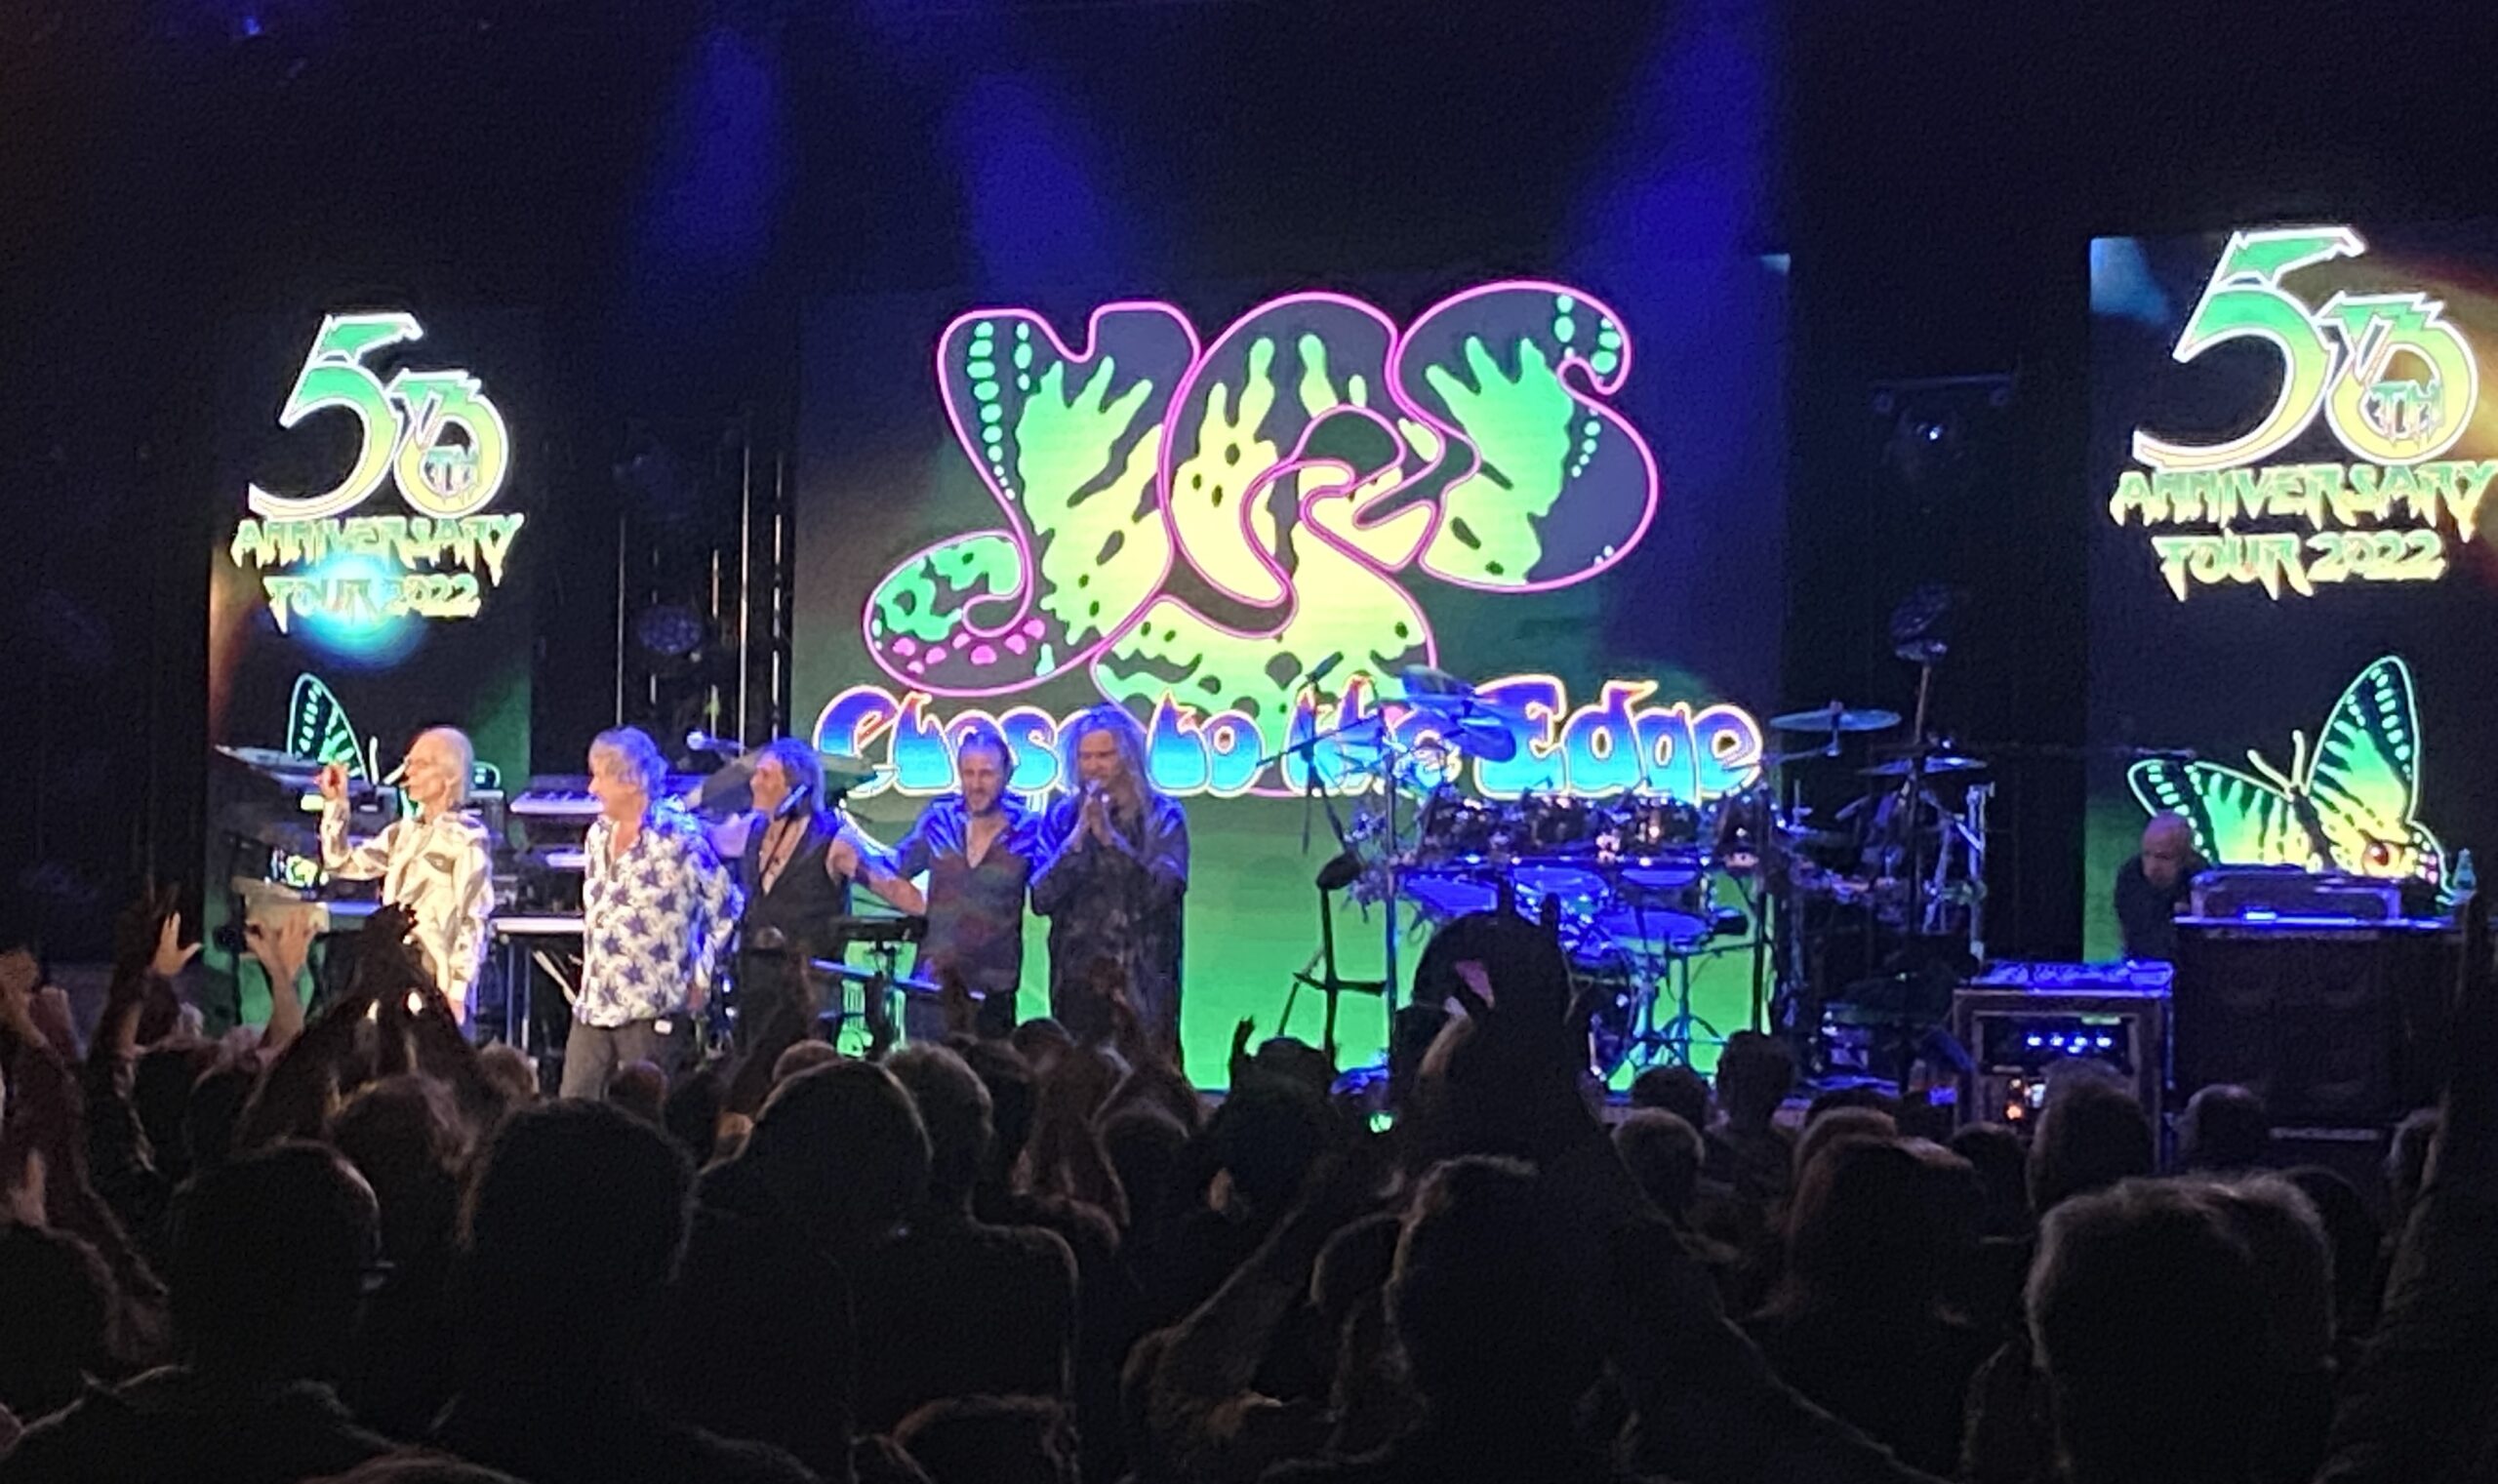 Concert Review Yes Close To The Edge 50th Anniversary Tour, Dublin